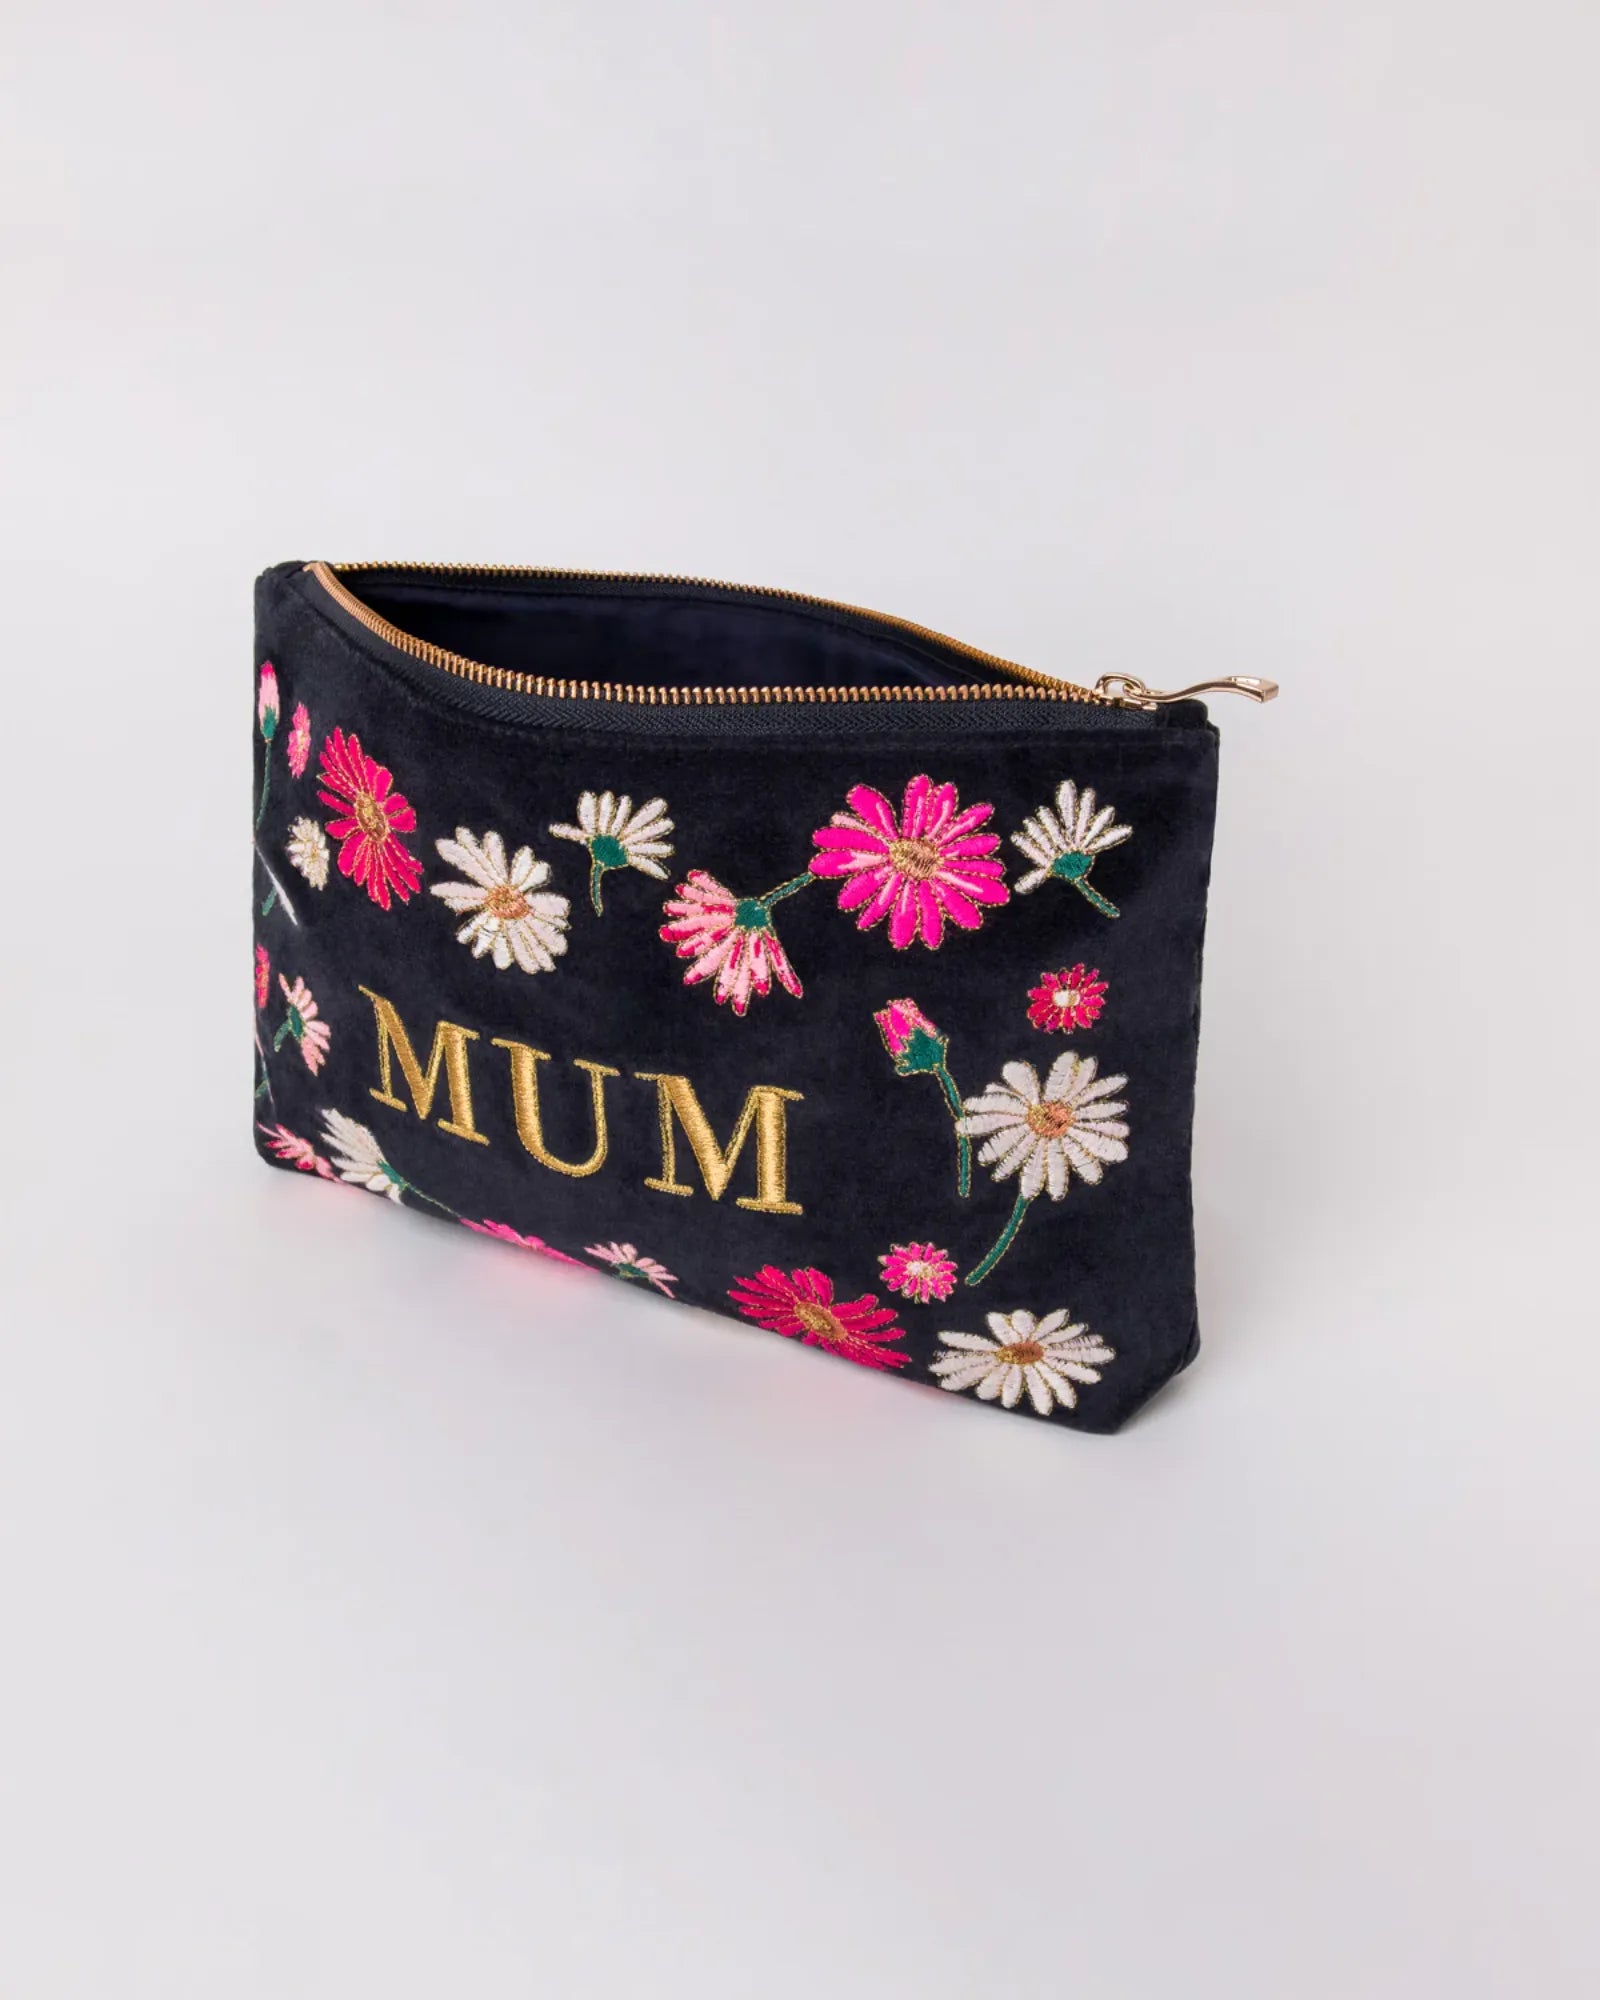 MUM Everyday Pouch - Charcoal